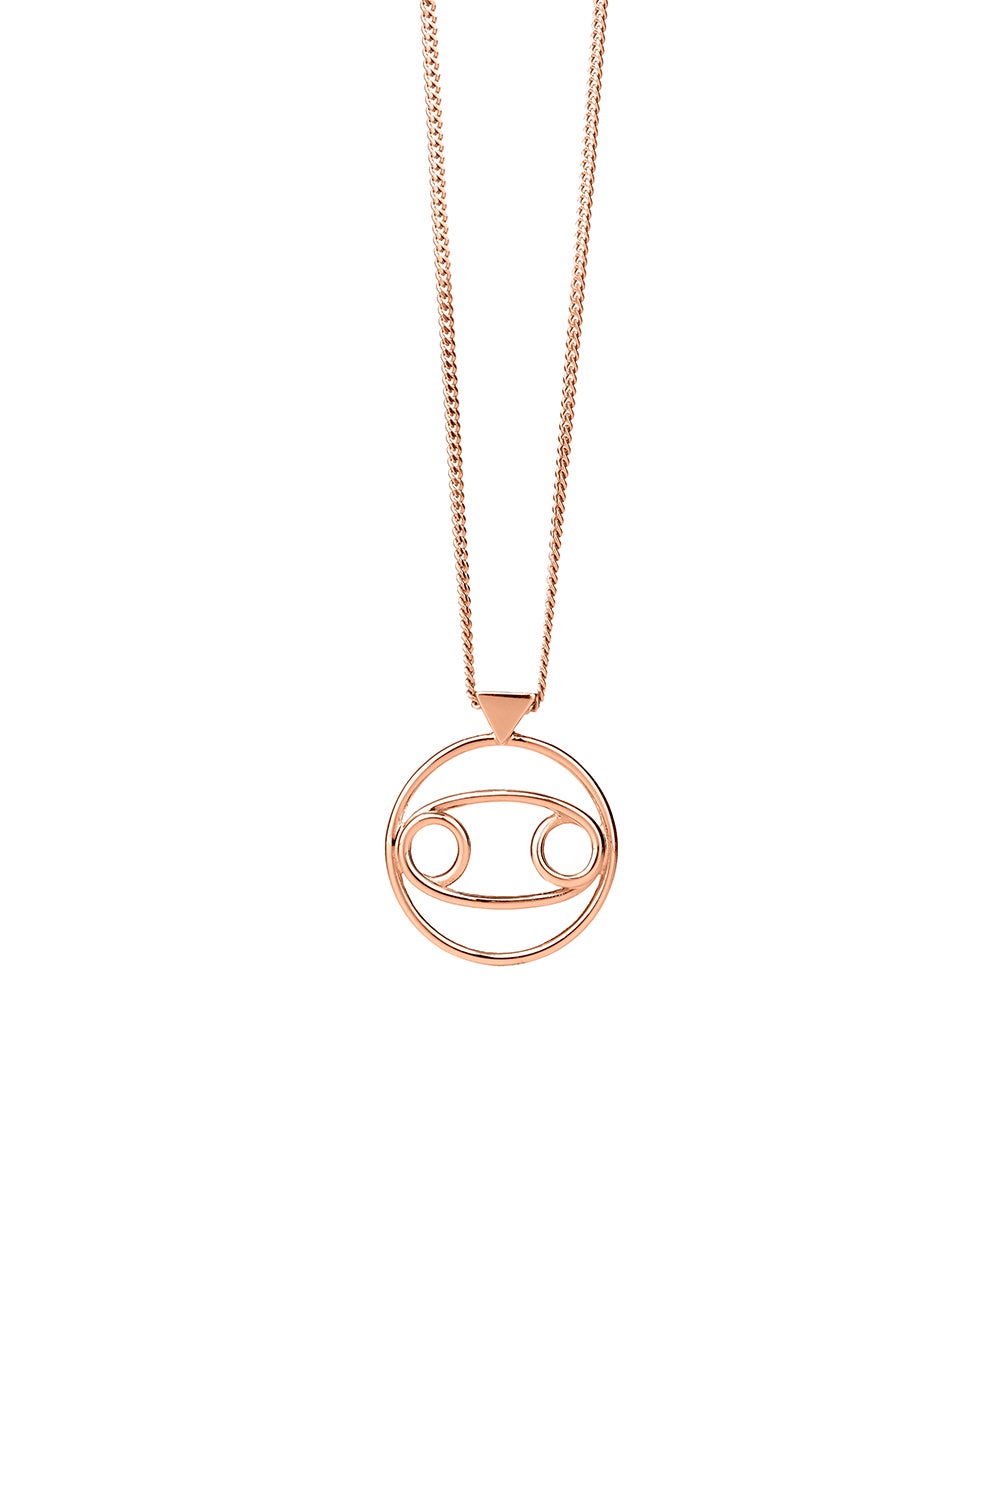 Zodiac Collection - Cancer Necklace (Jun 21 - July 22) | Kinsley Armelle®  Official